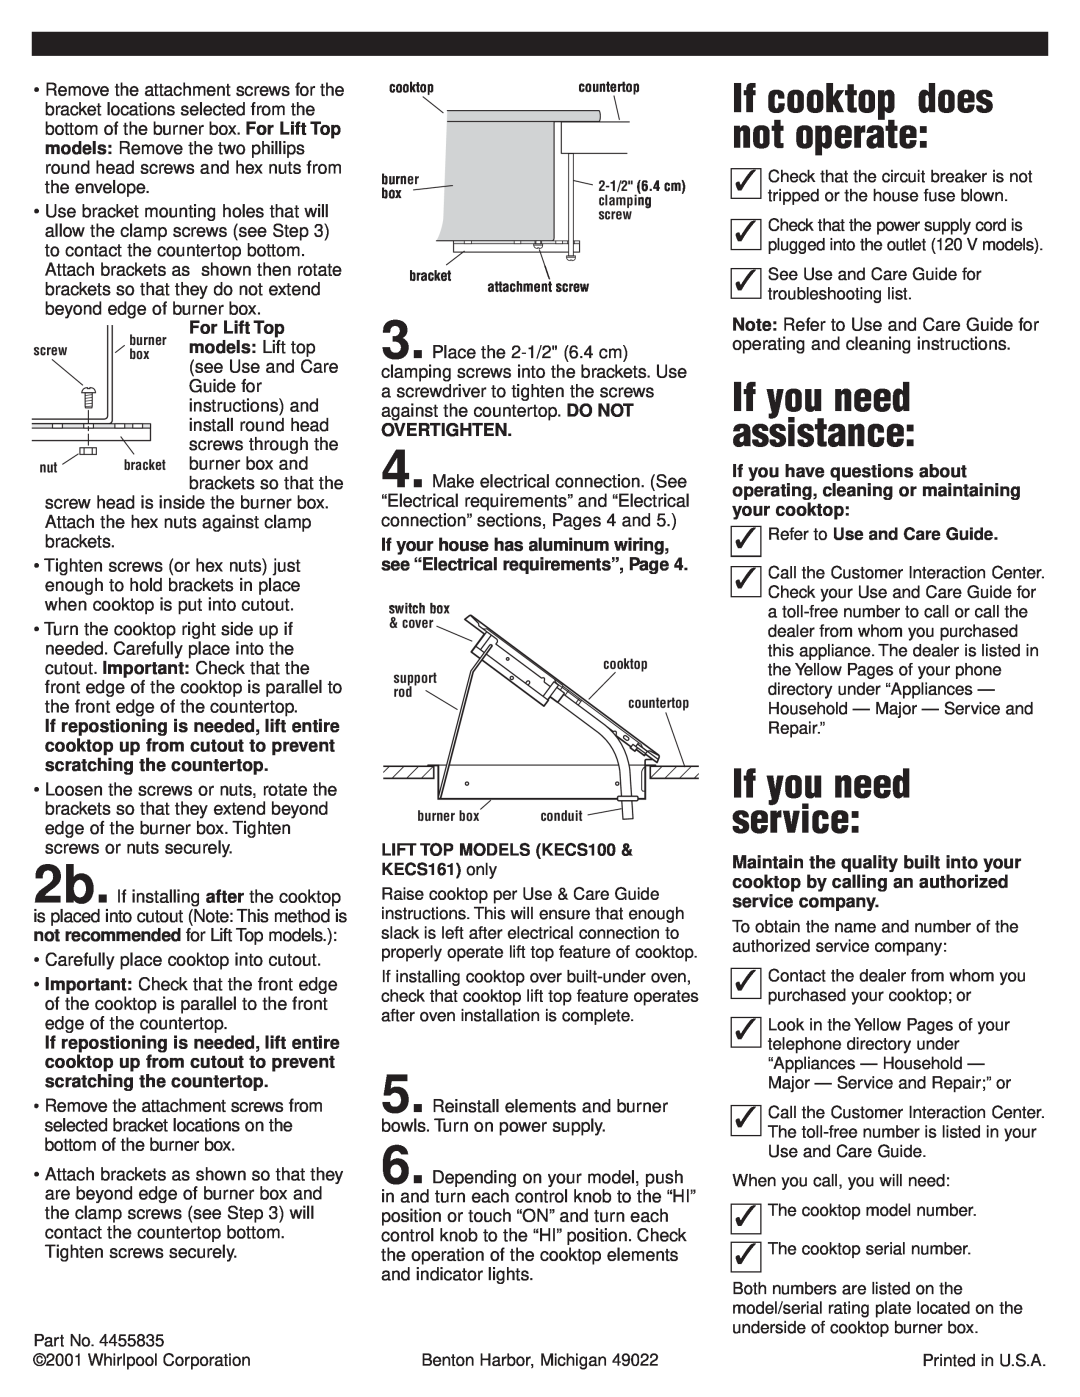 Whirlpool RCS2002GS1 installation instructions If cooktop does not operate, If you need assistance, If you need service 